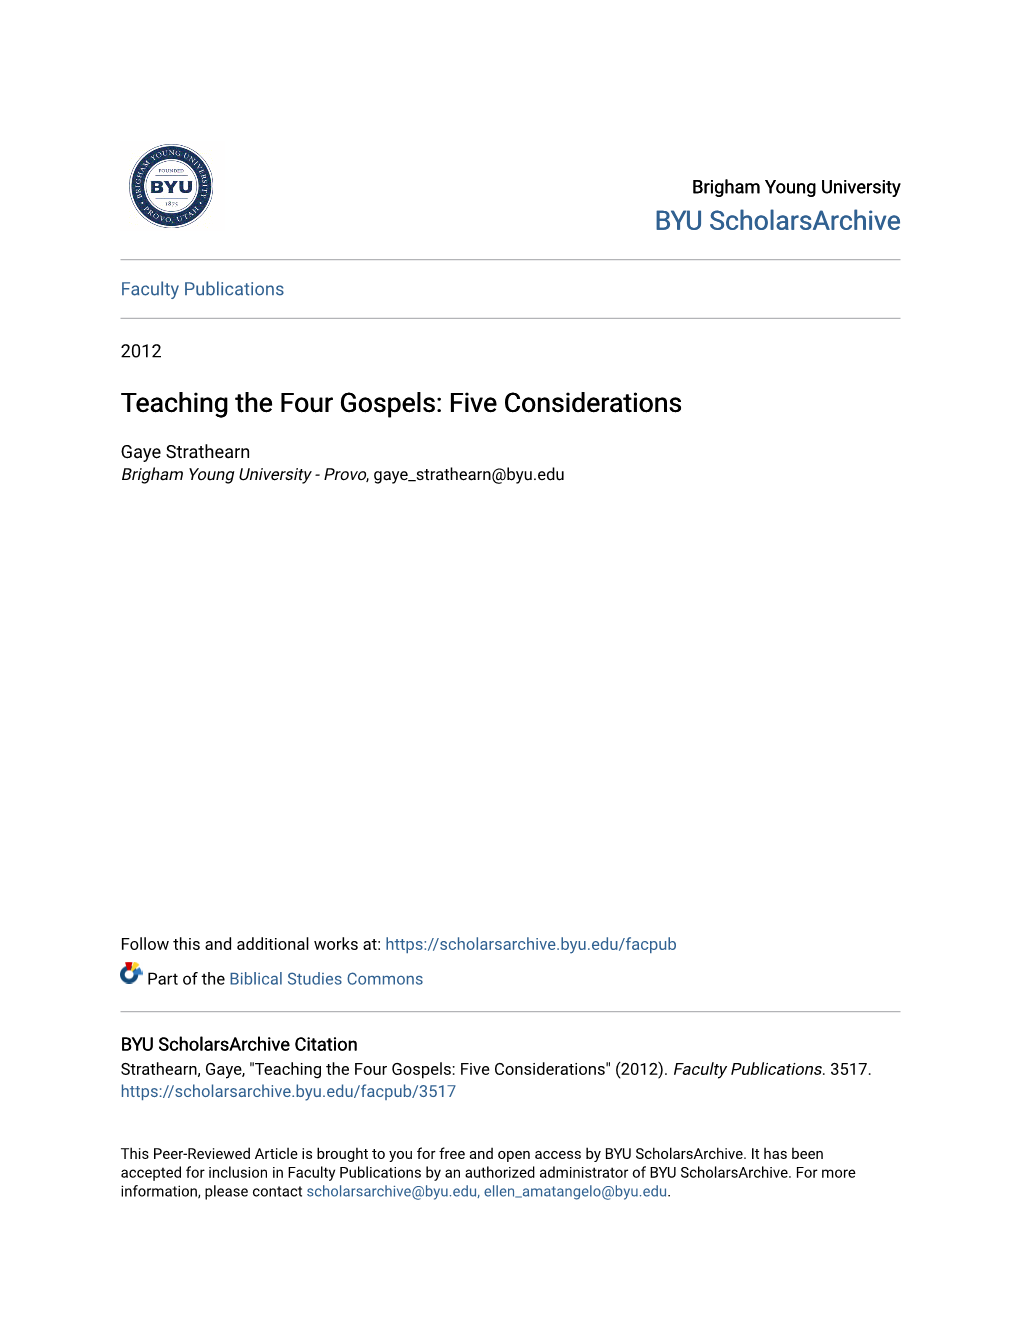 Teaching the Four Gospels: Five Considerations